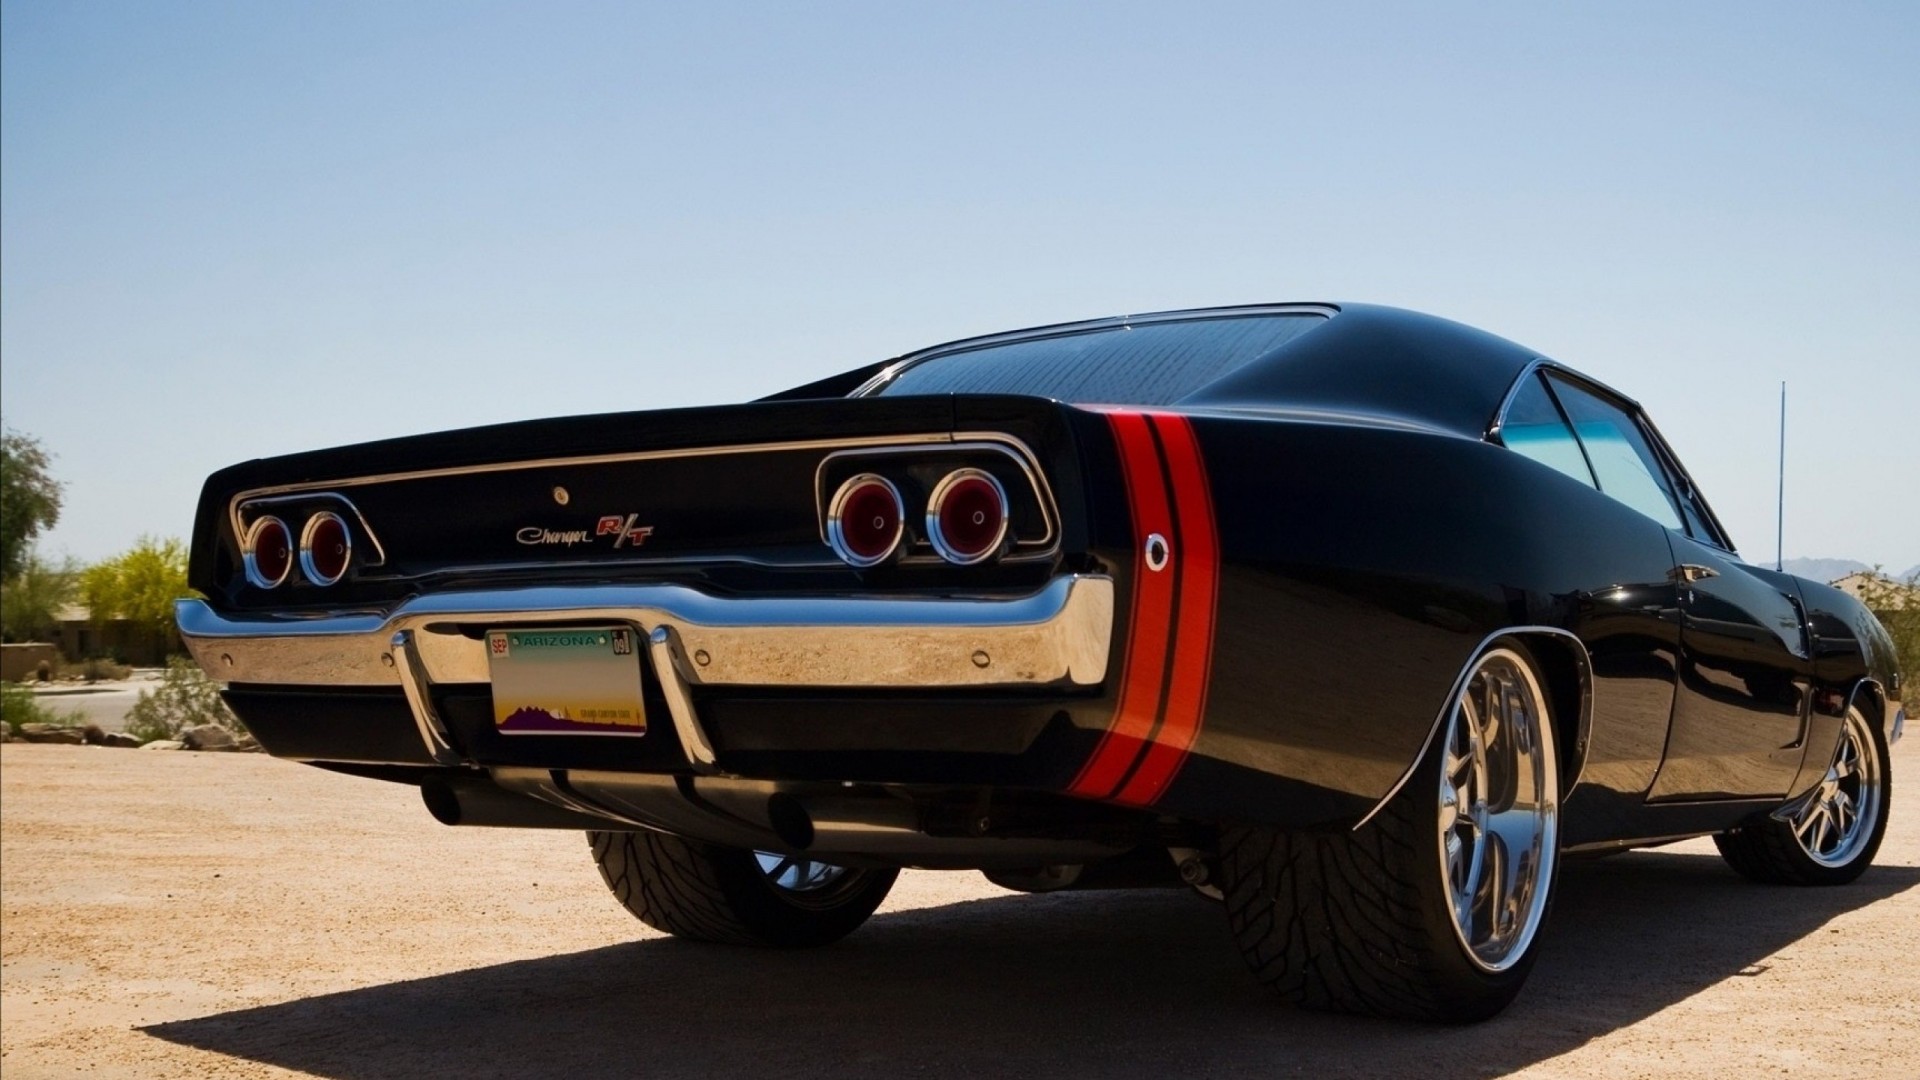 Old muscle Cars Dodge Charger Wallpaper   MixHD wallpapers 1920x1080